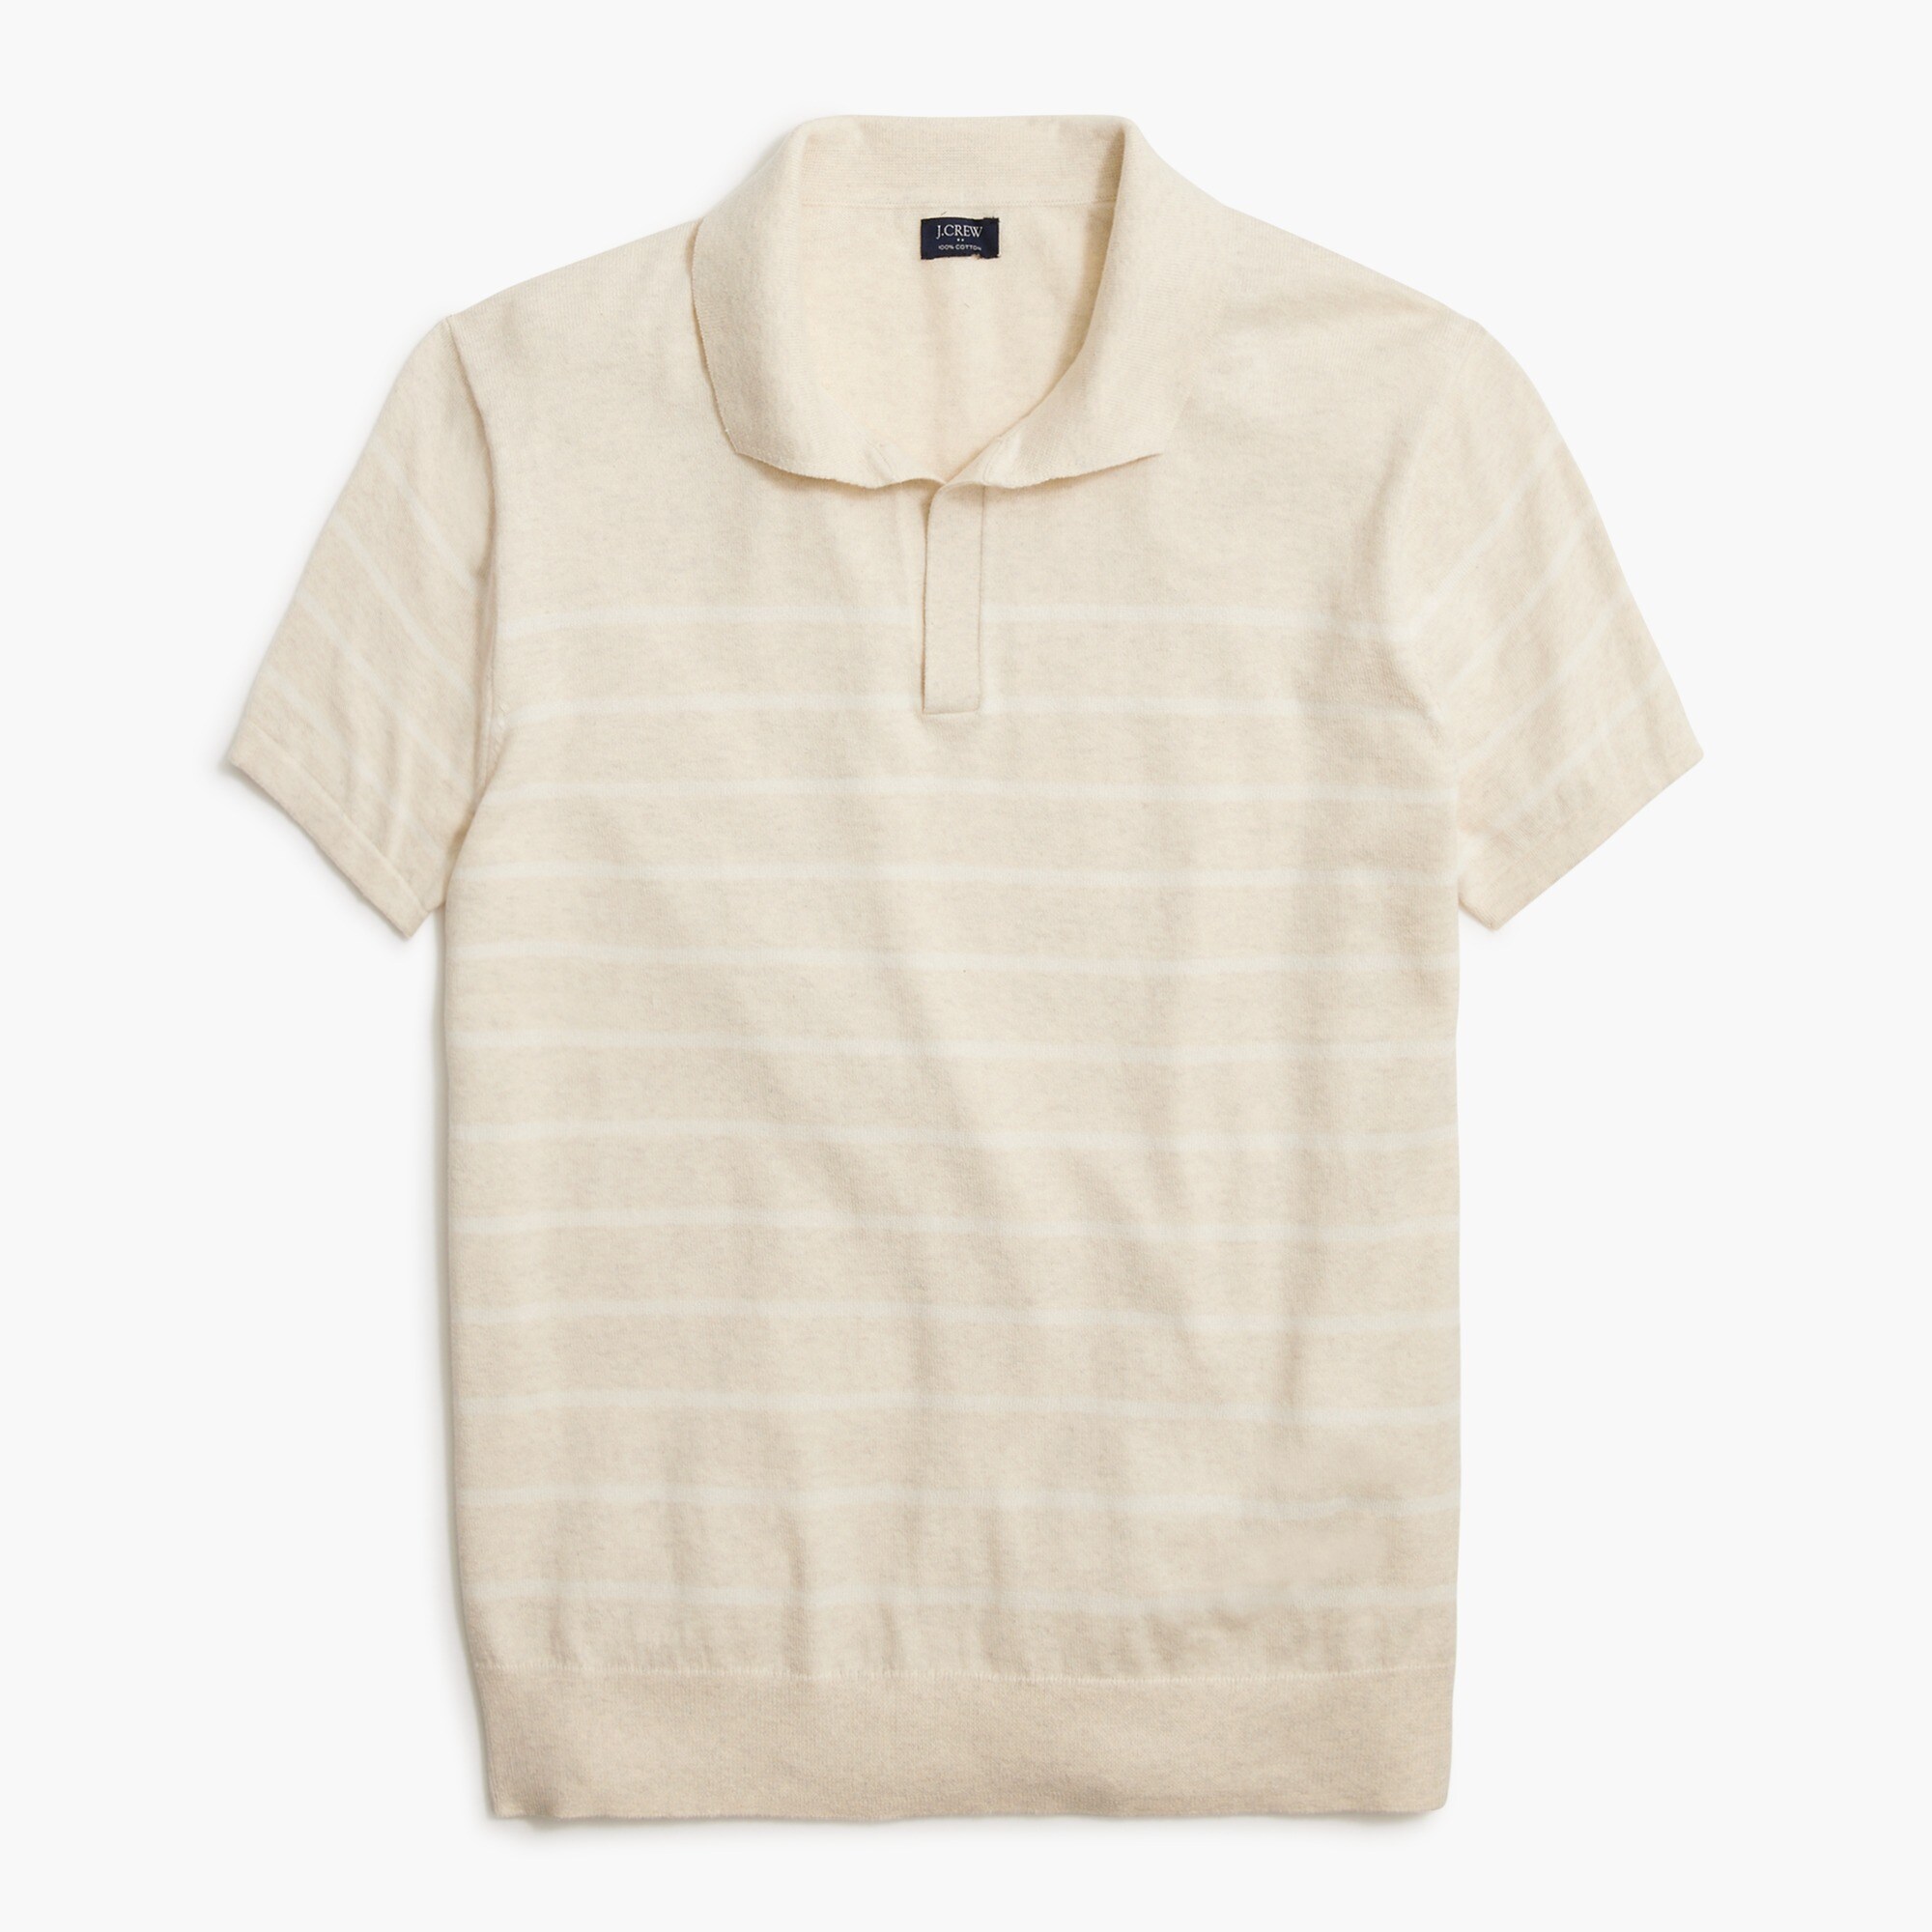  Striped johnny-collar sweater-polo